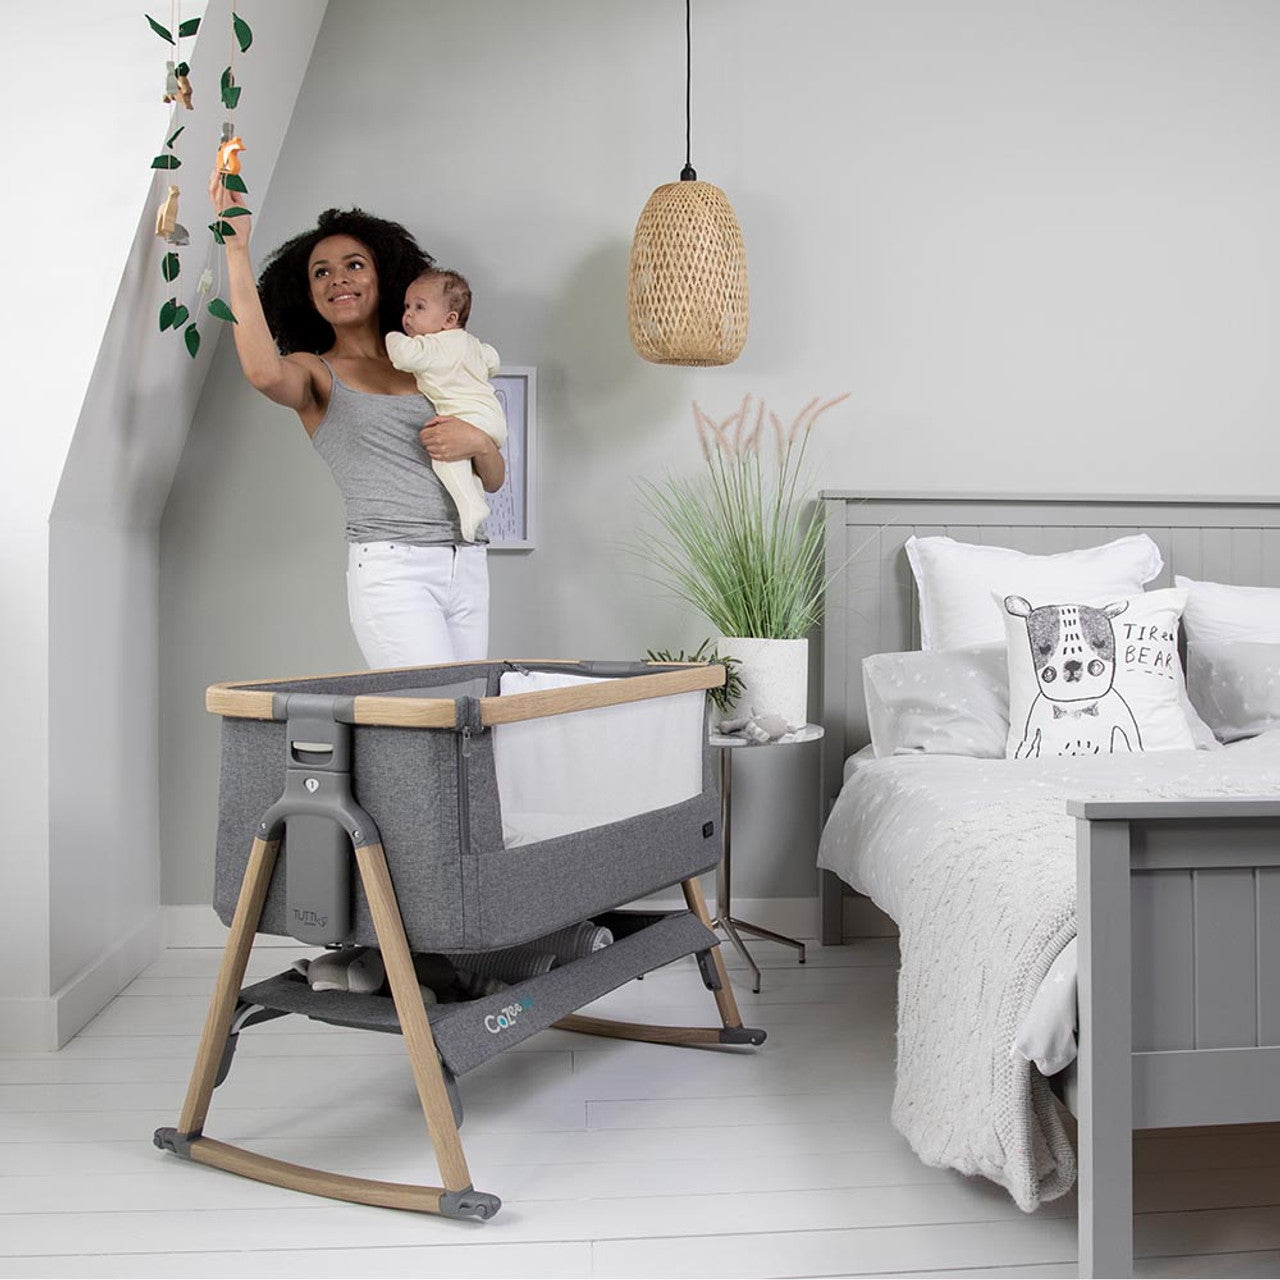 Tutti Bambini CoZee® Air Bedside Crib - Sterling Silver/Oak -  | For Your Little One